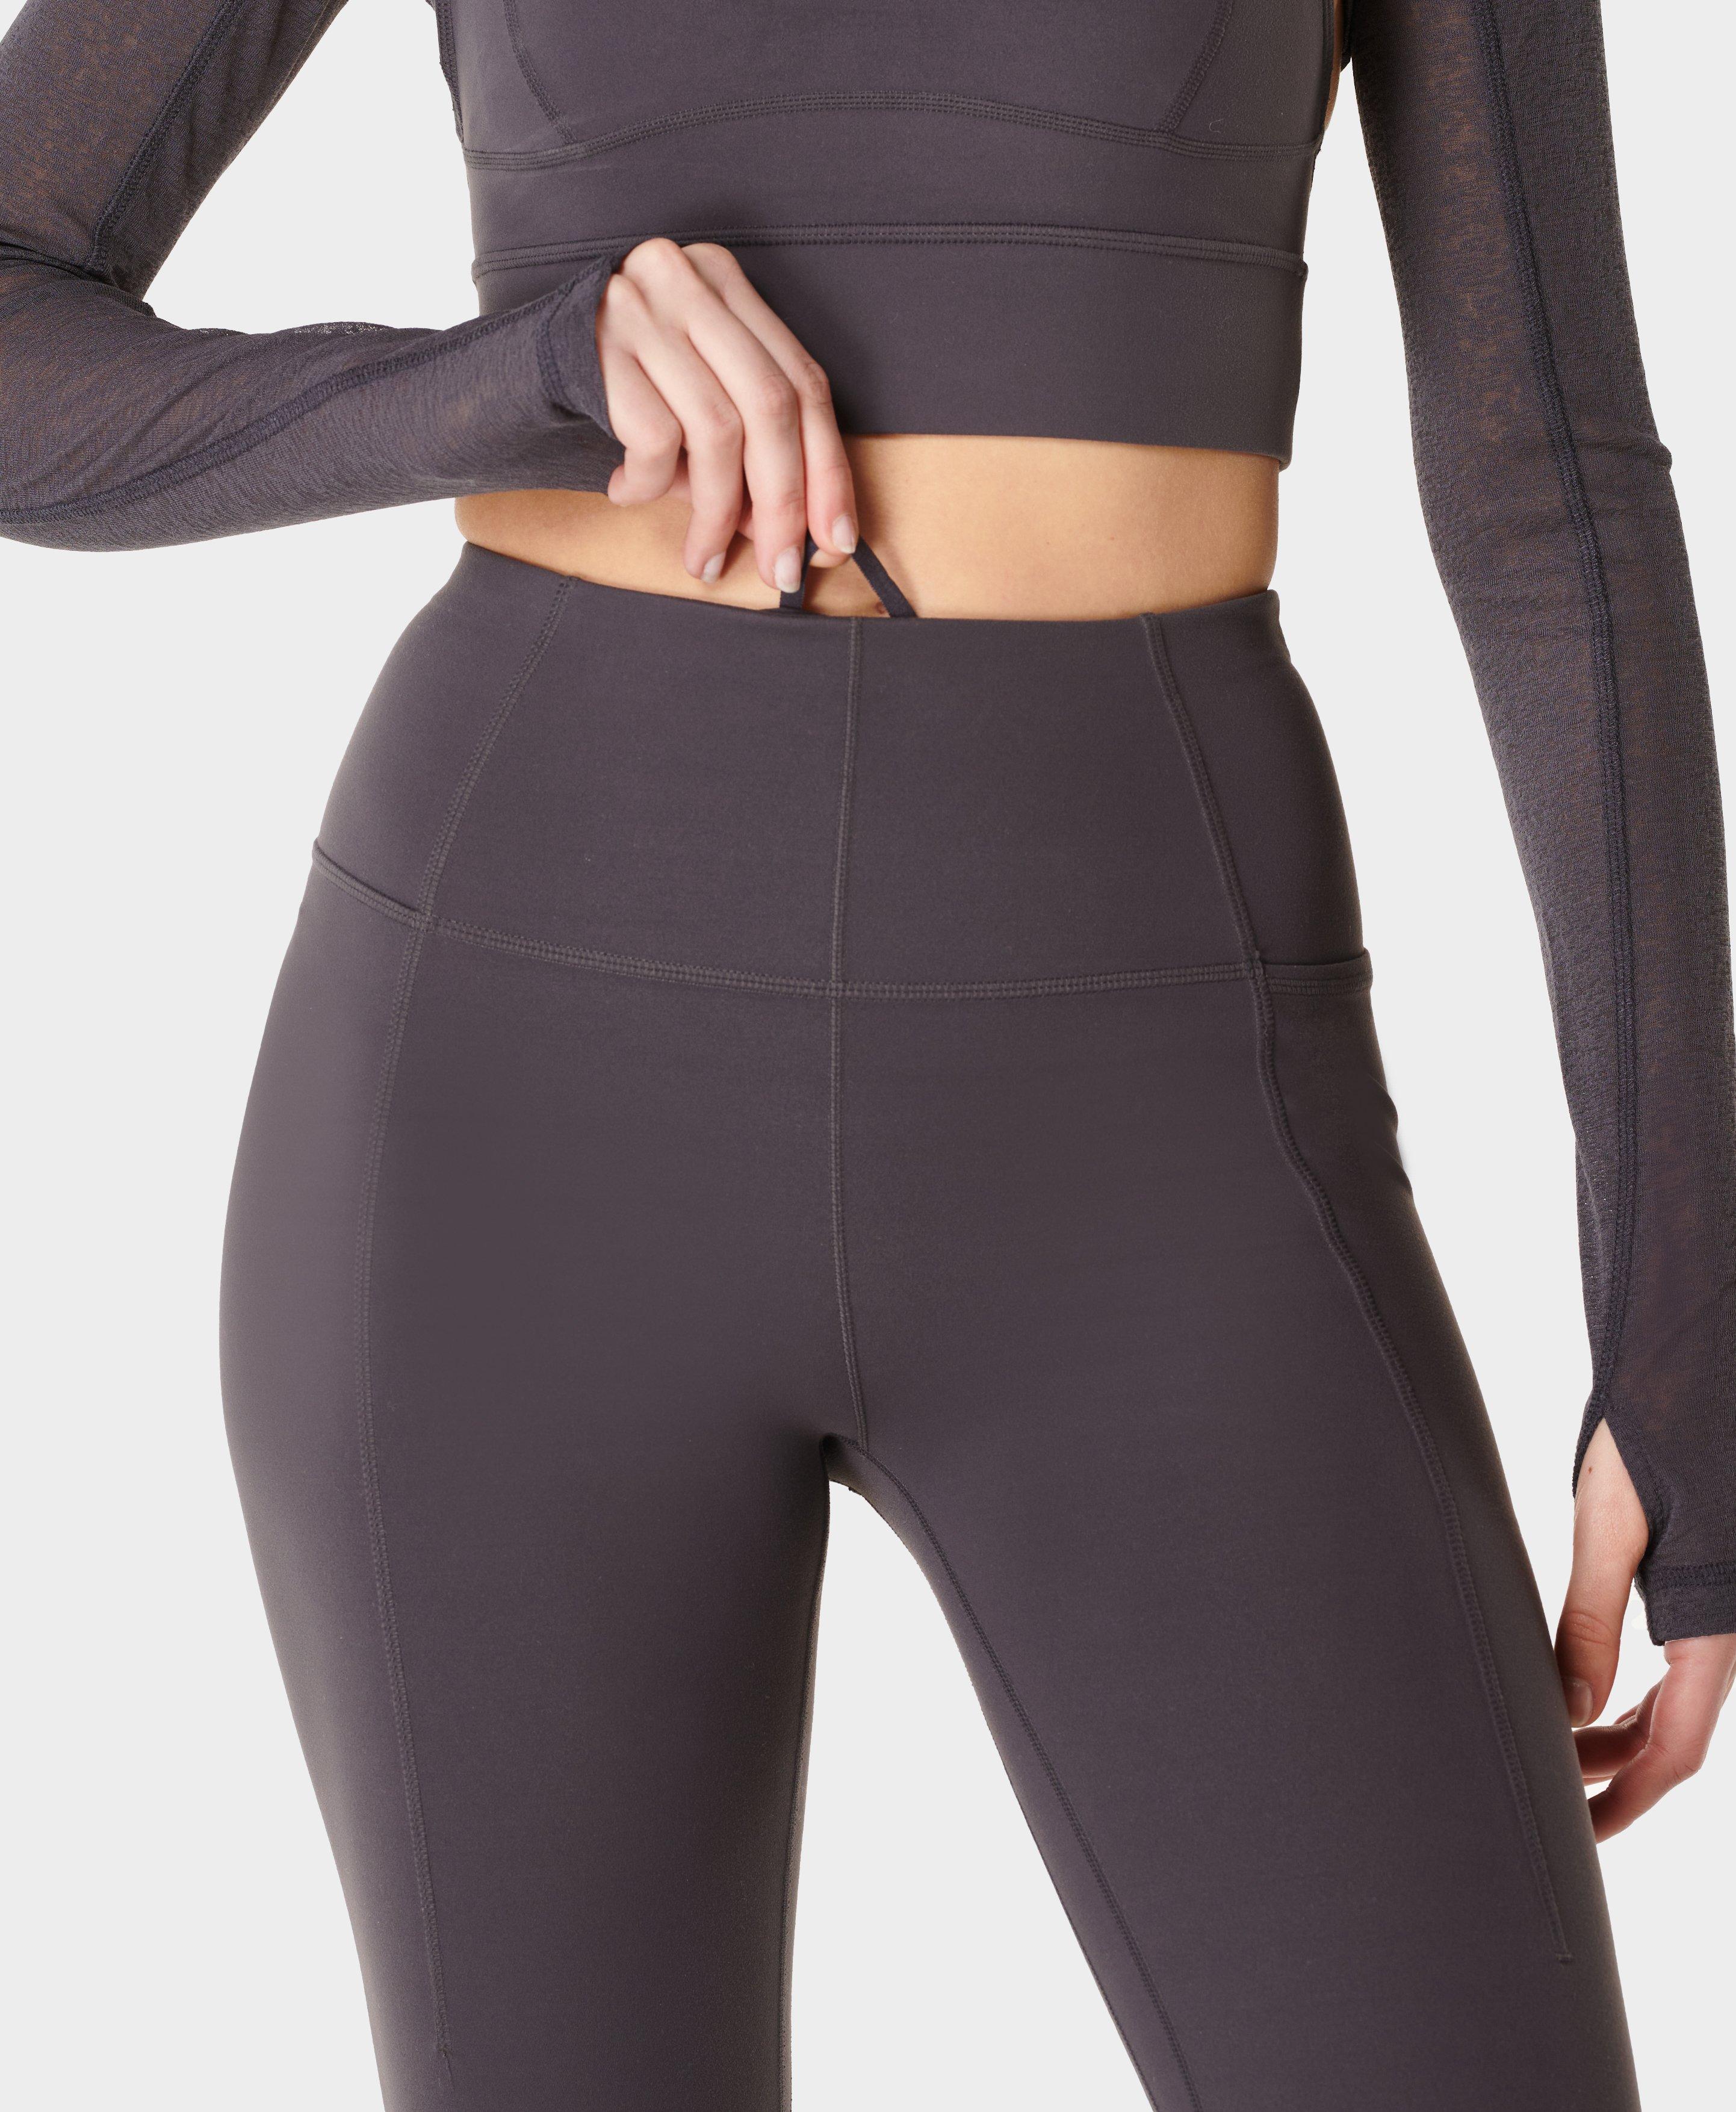 2023 Sweaty Betty High Waist Yoga Pants Summer Active Wear For Women,  Breathable Fitness Leggings In Black, Gray, Yellow From Lilyclothing,  $19.94